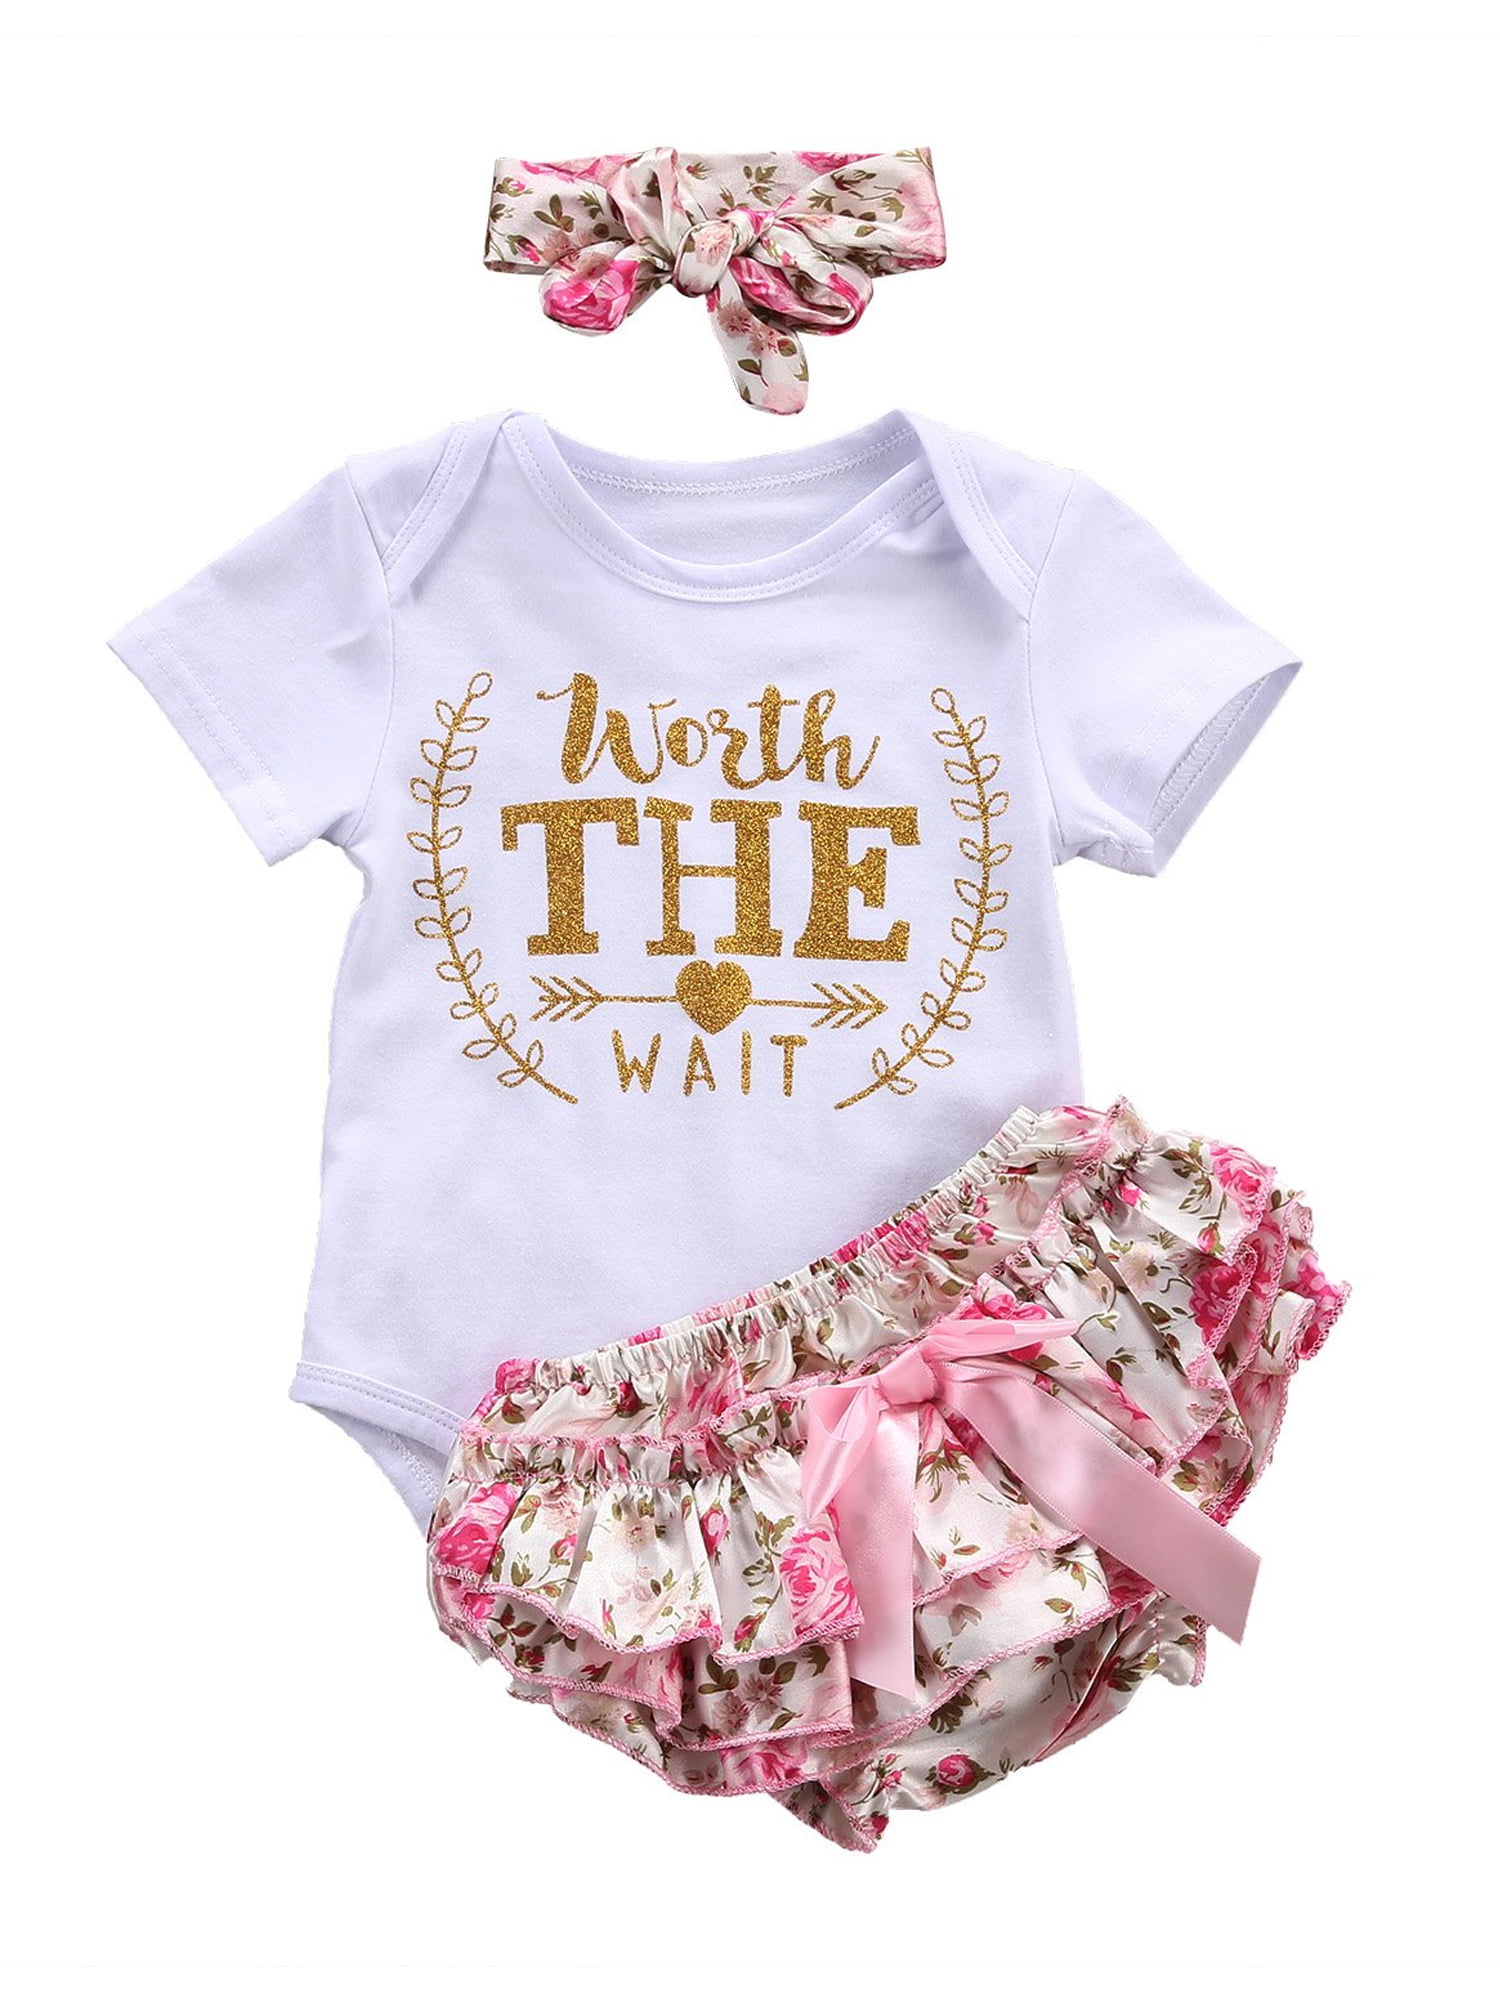 Newborn Baby Girl Clothes Set Romper Jumpsuit Tops Floral Pants Headband Outfits 